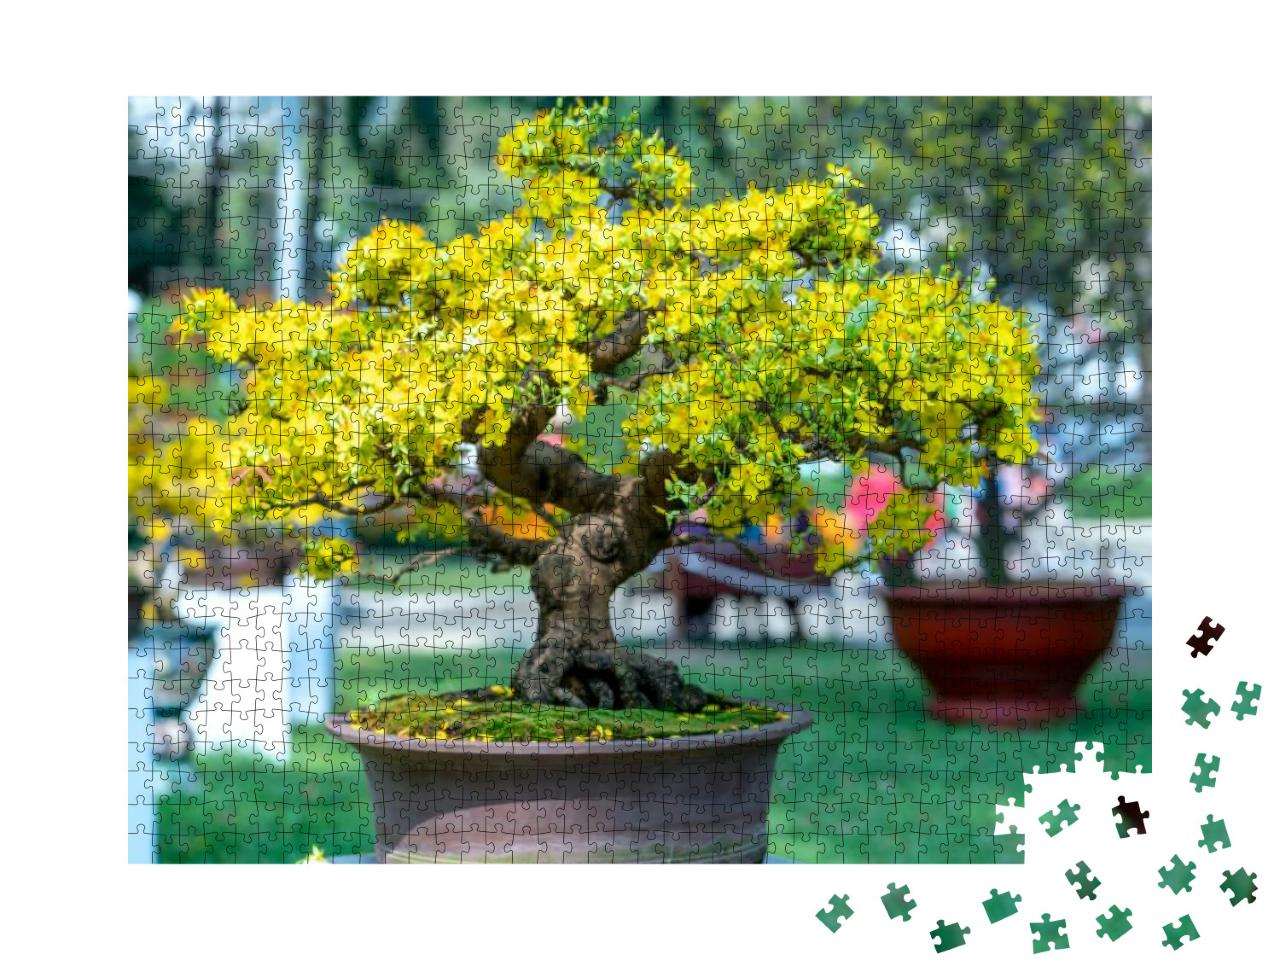 Apricot Bonsai Tree Blooming with Yellow Flowering Branch... Jigsaw Puzzle with 1000 pieces